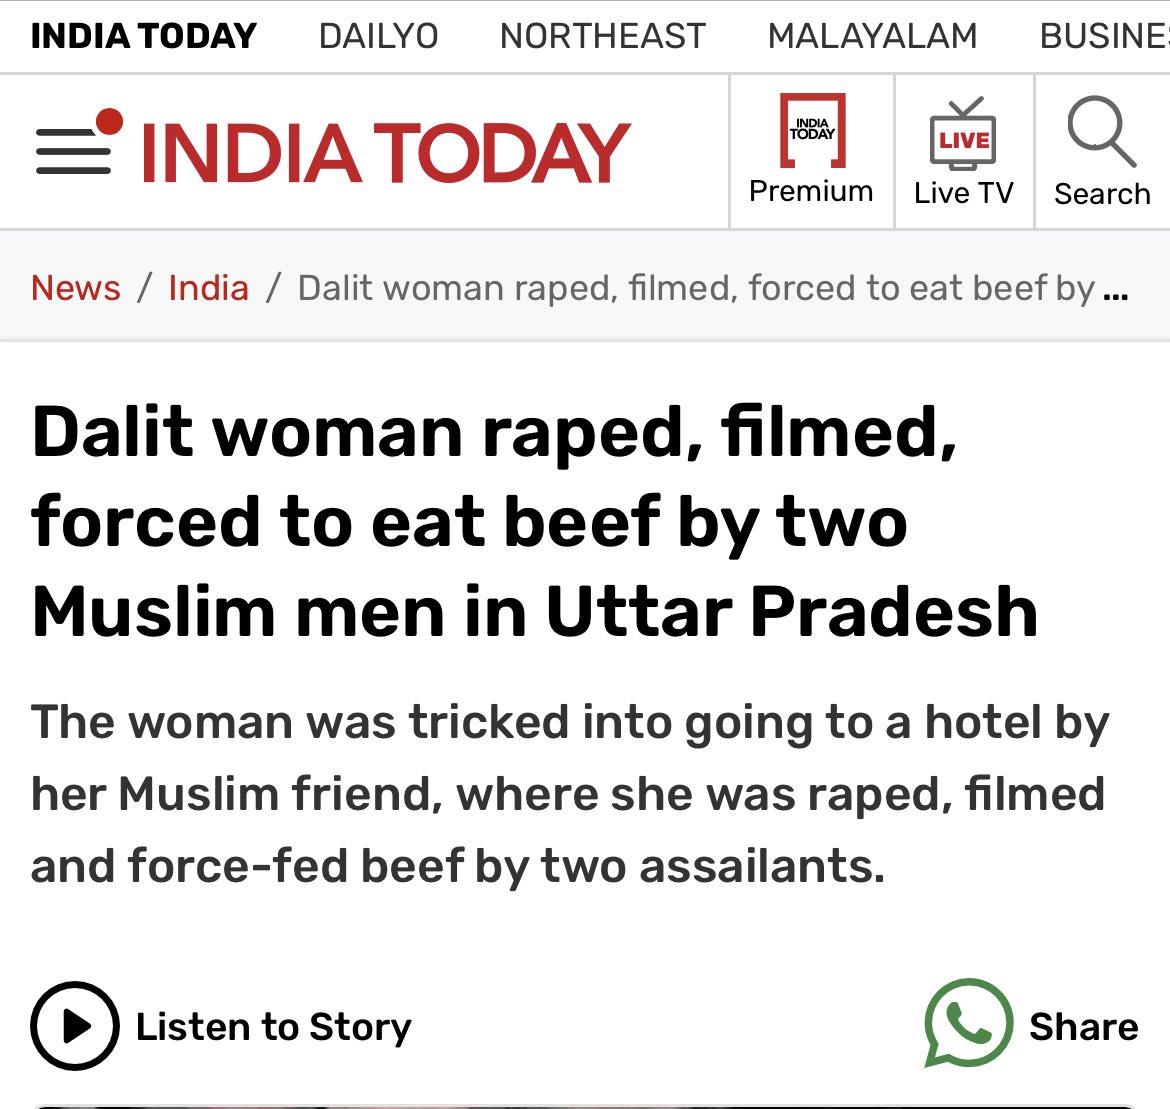 Absolutely Shocking 😡 A Dalit woman was raped, filmed & made to eat Beef by her Muslim friends Where are the champions of Dalit rights..? Where are the so called Secular Muslims..? Will Zubair run this story..? Where are those who targeted Hindus of Manipur...?